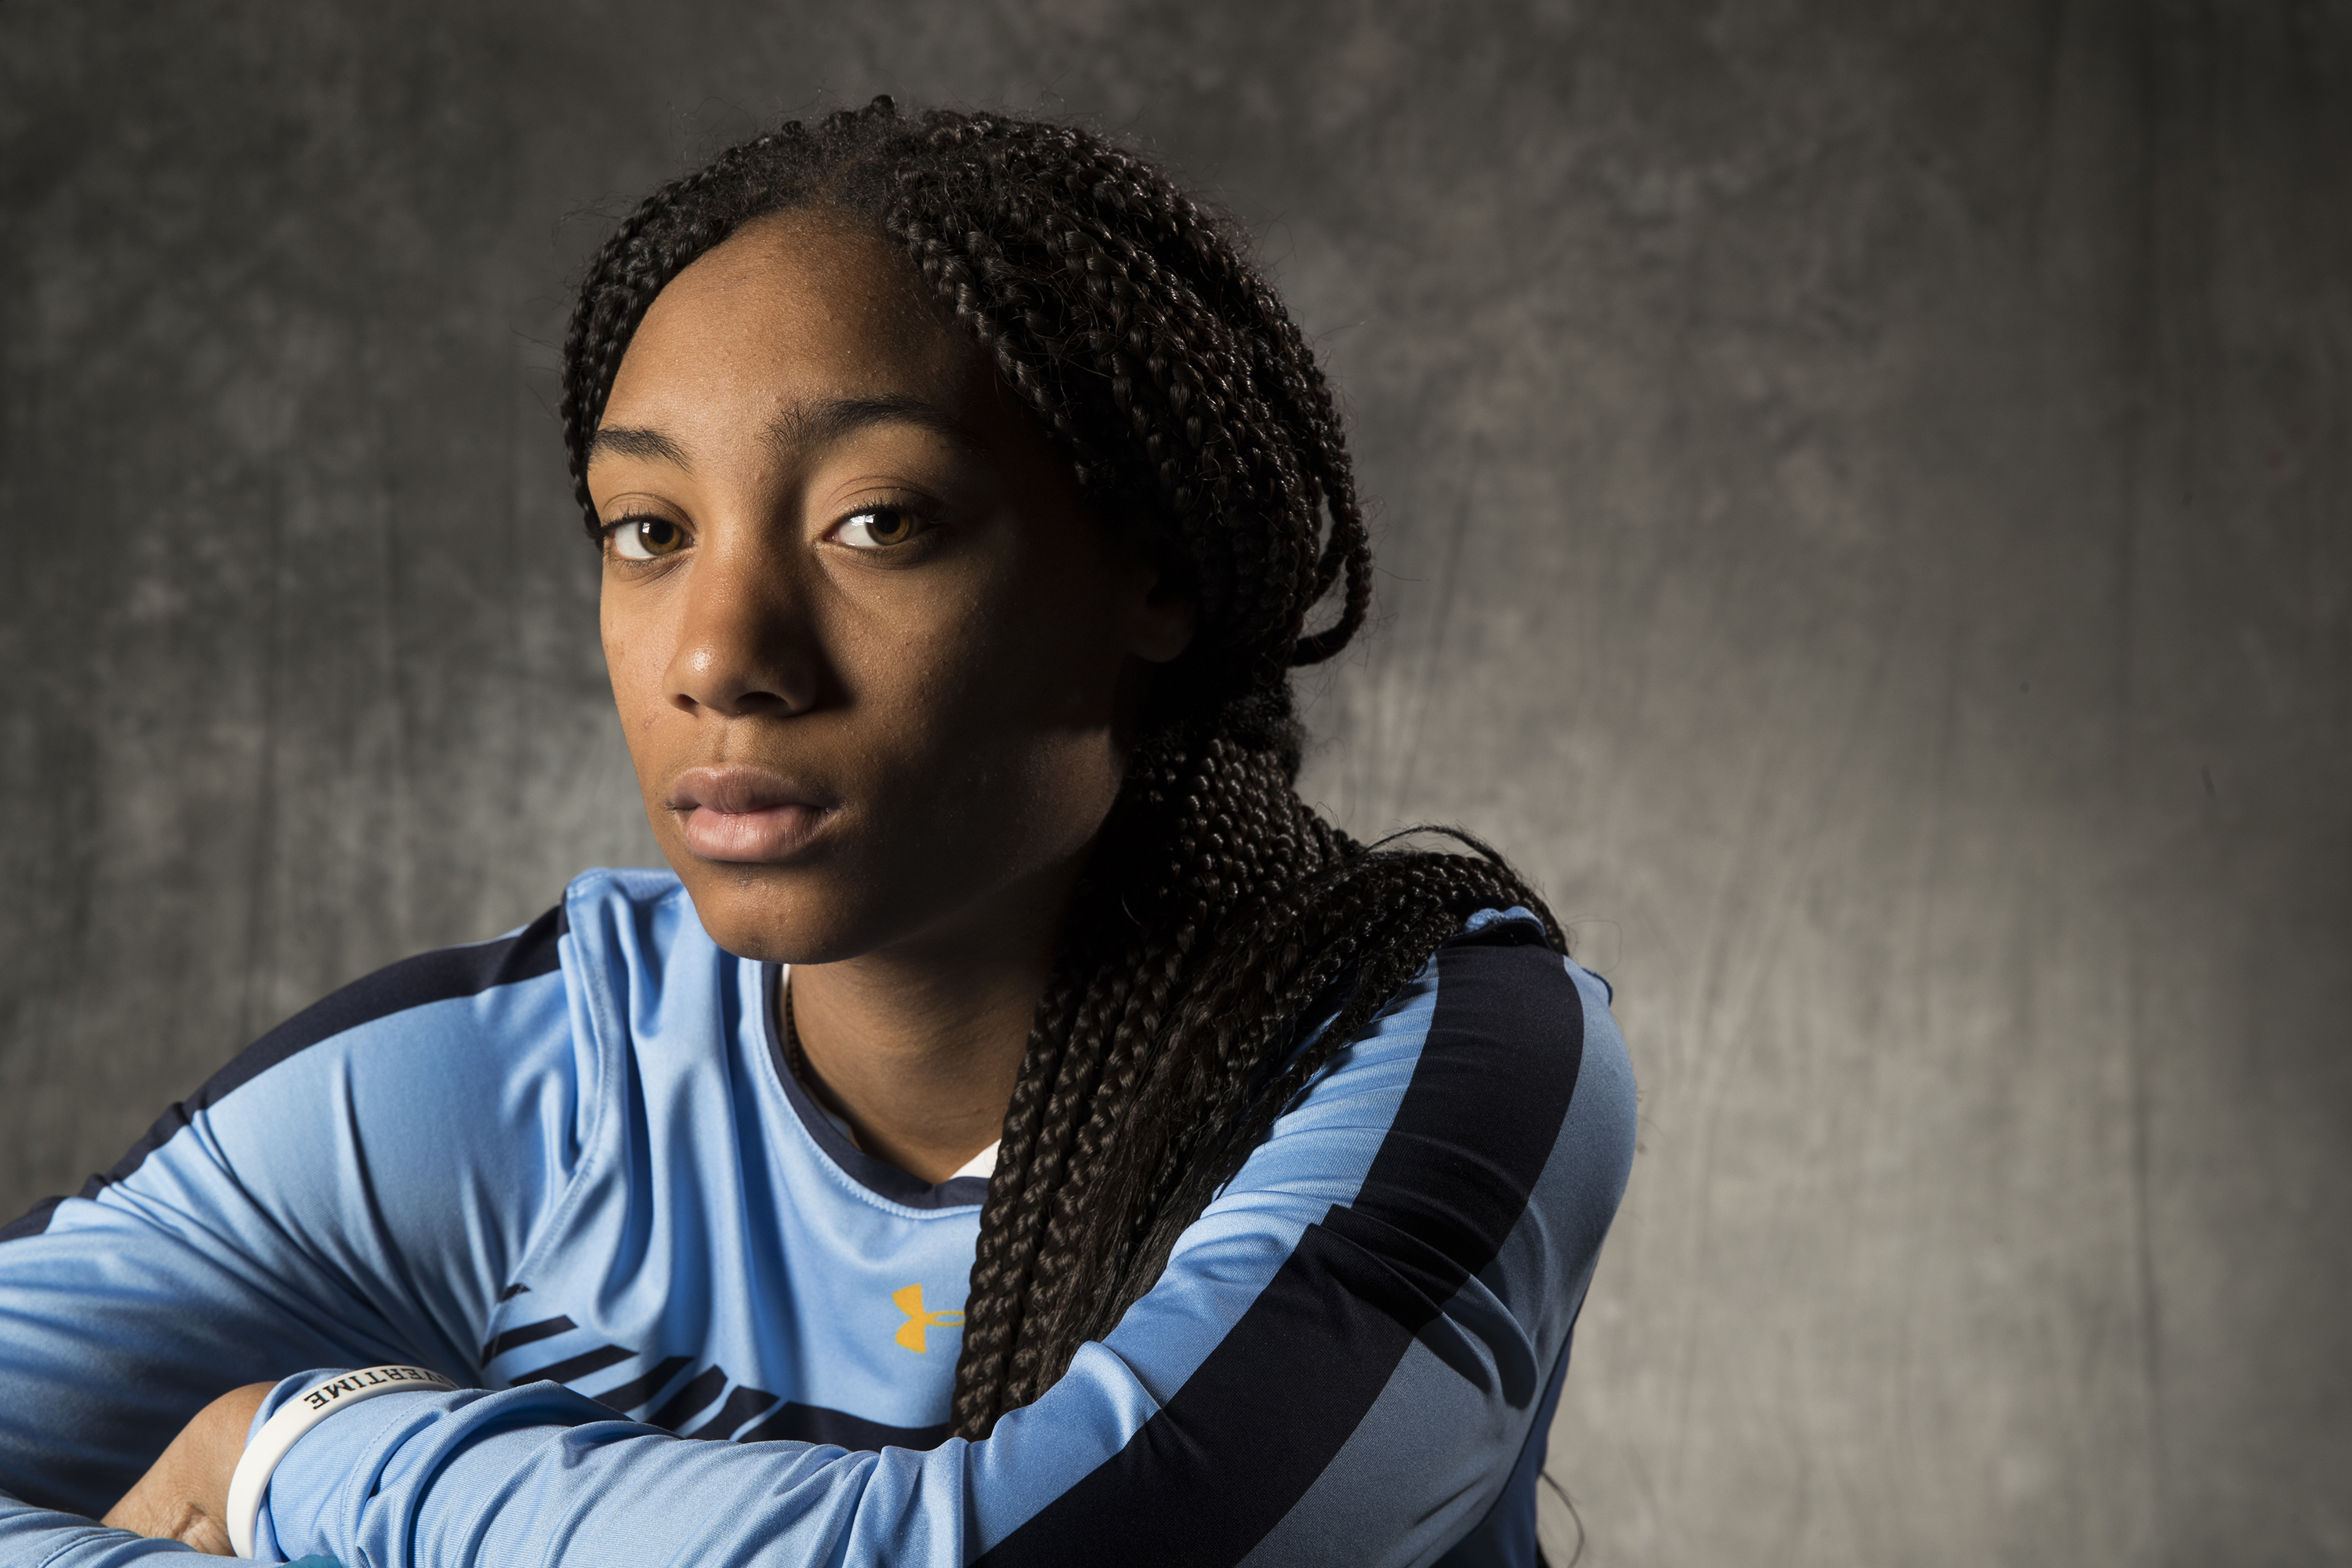 Mo'ne Davis' baseball journey continues with Los Angeles Dodgers